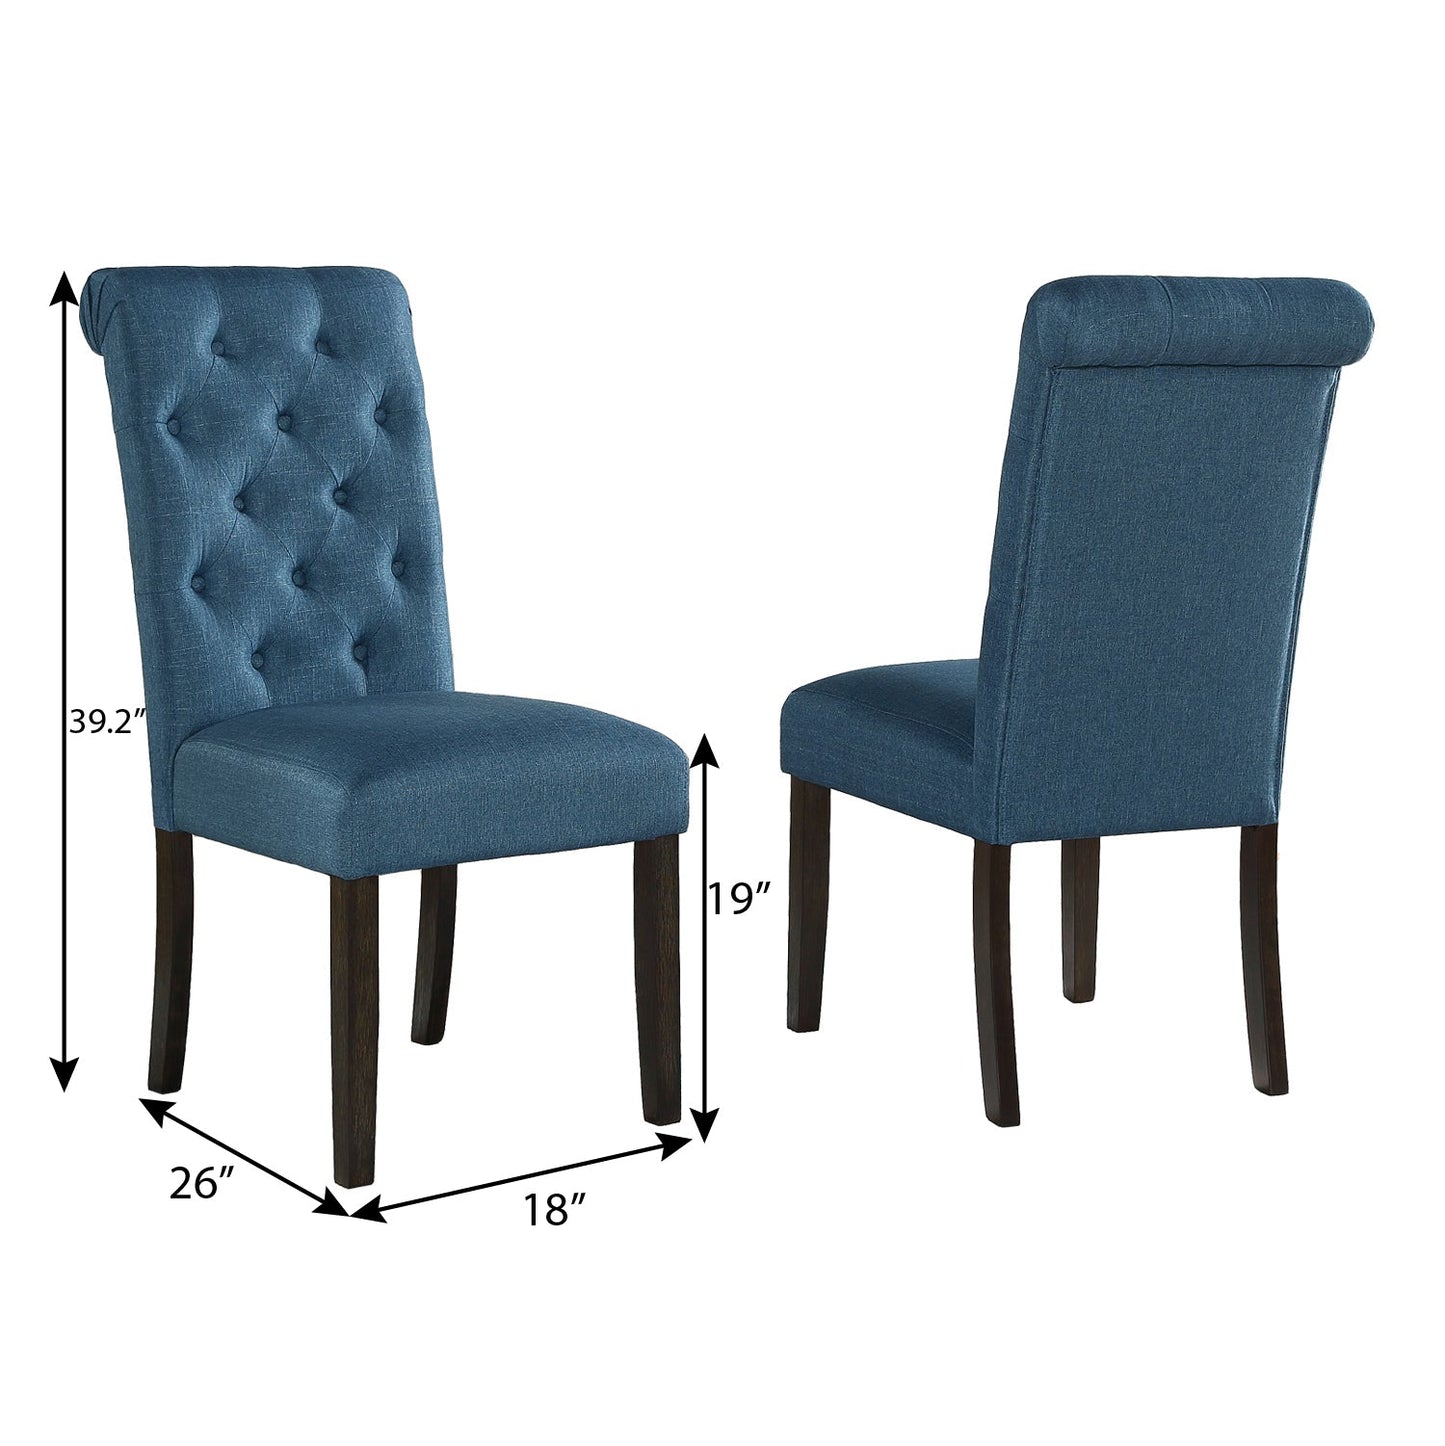 Leviton Solid Wood Tufted Asons Dining Chair, Set of 2, Blue